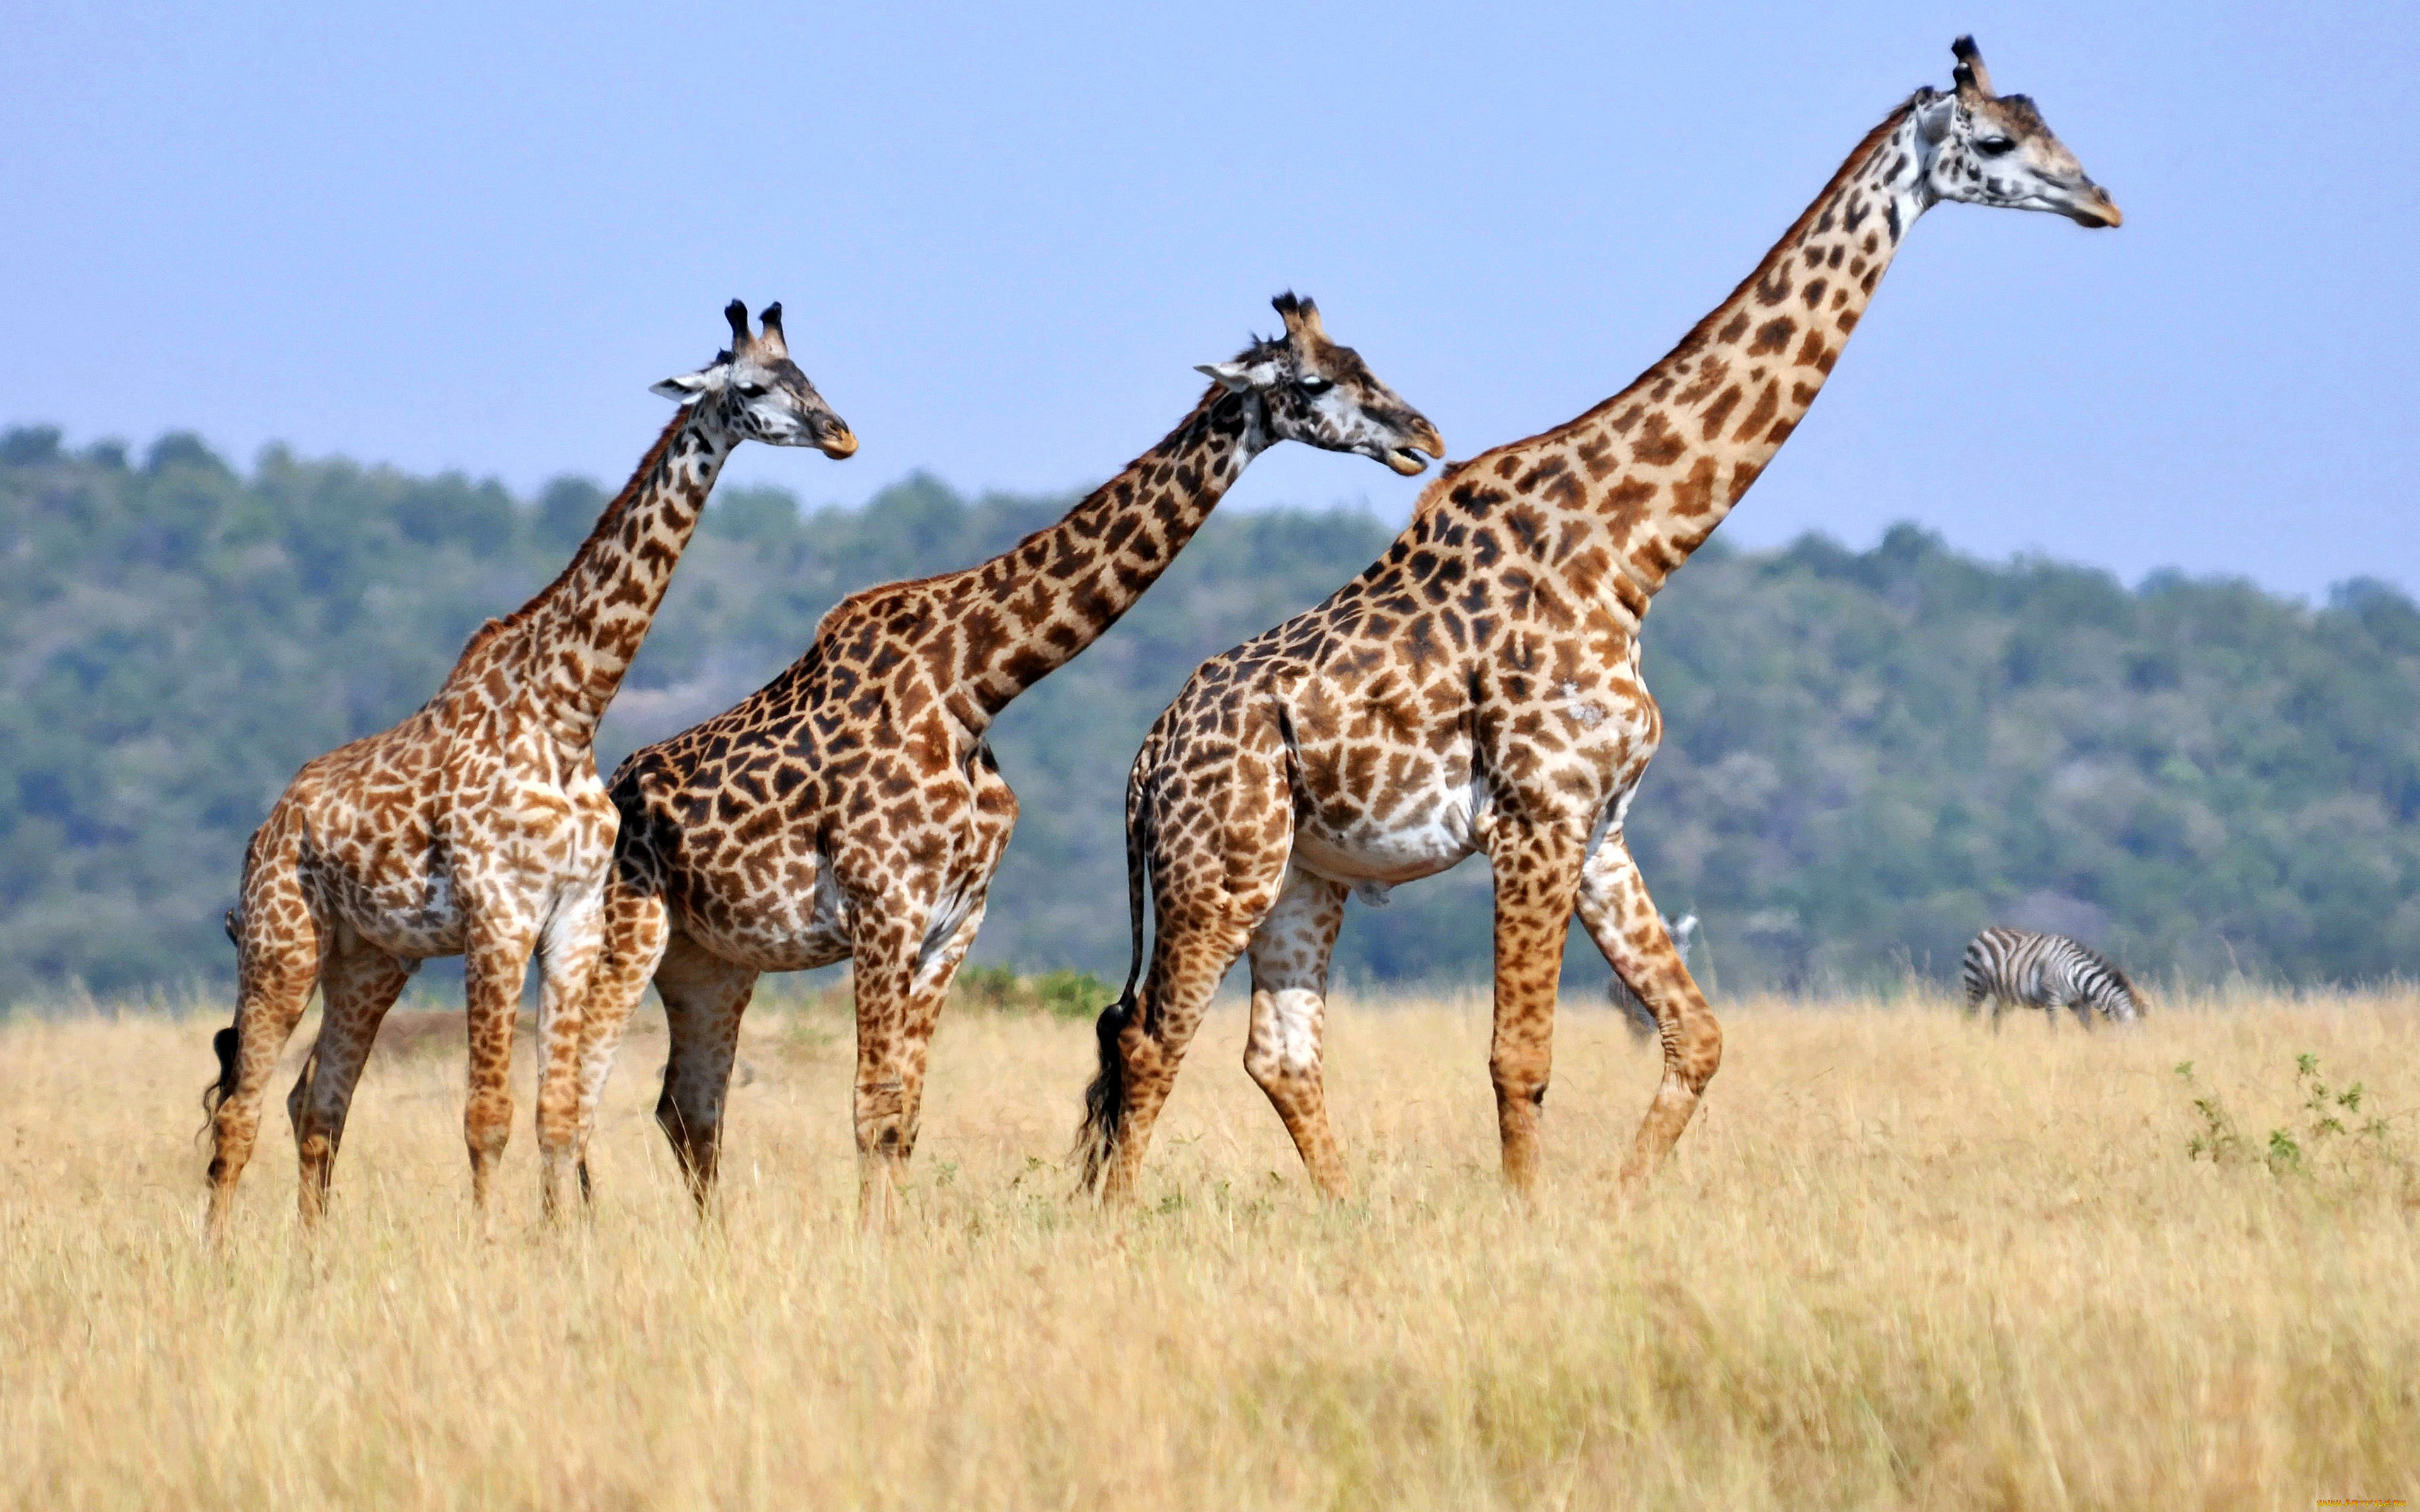 Three Giraffes, Animals With Long Neck Striped Body Casts Higher